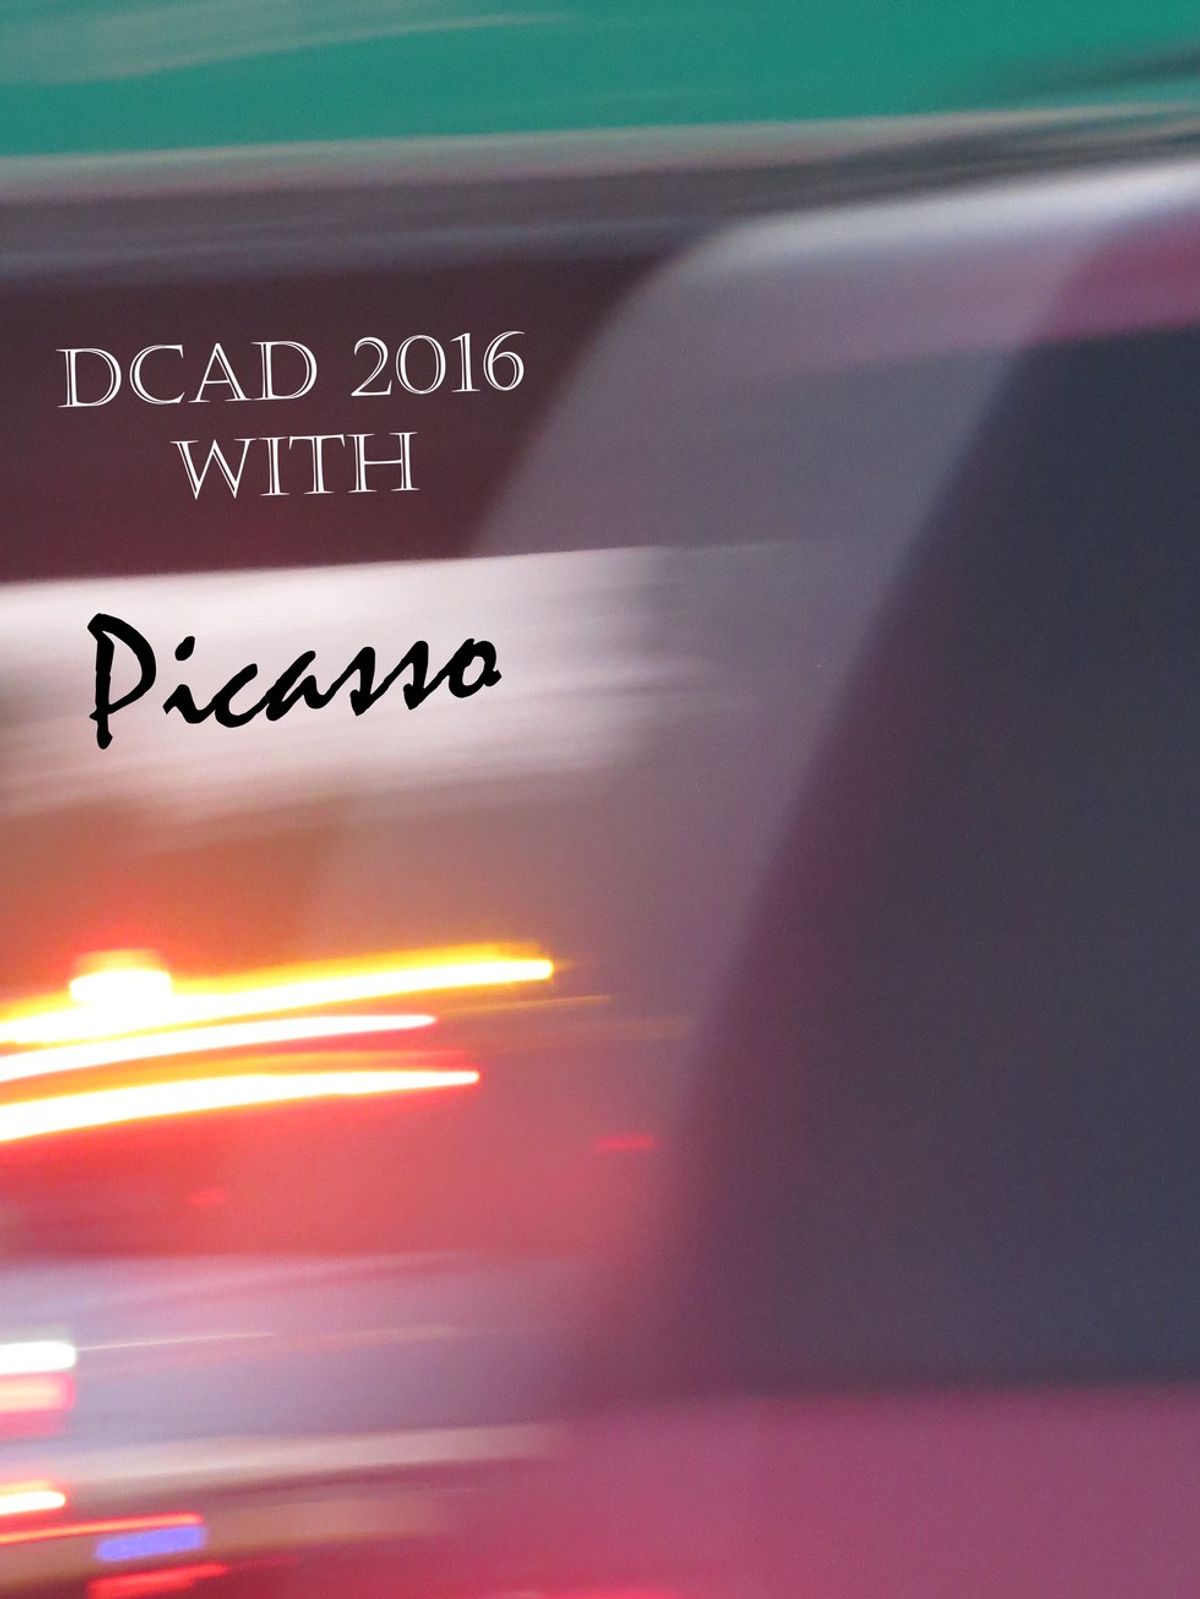 Picasso Considers Working At DCAD!?